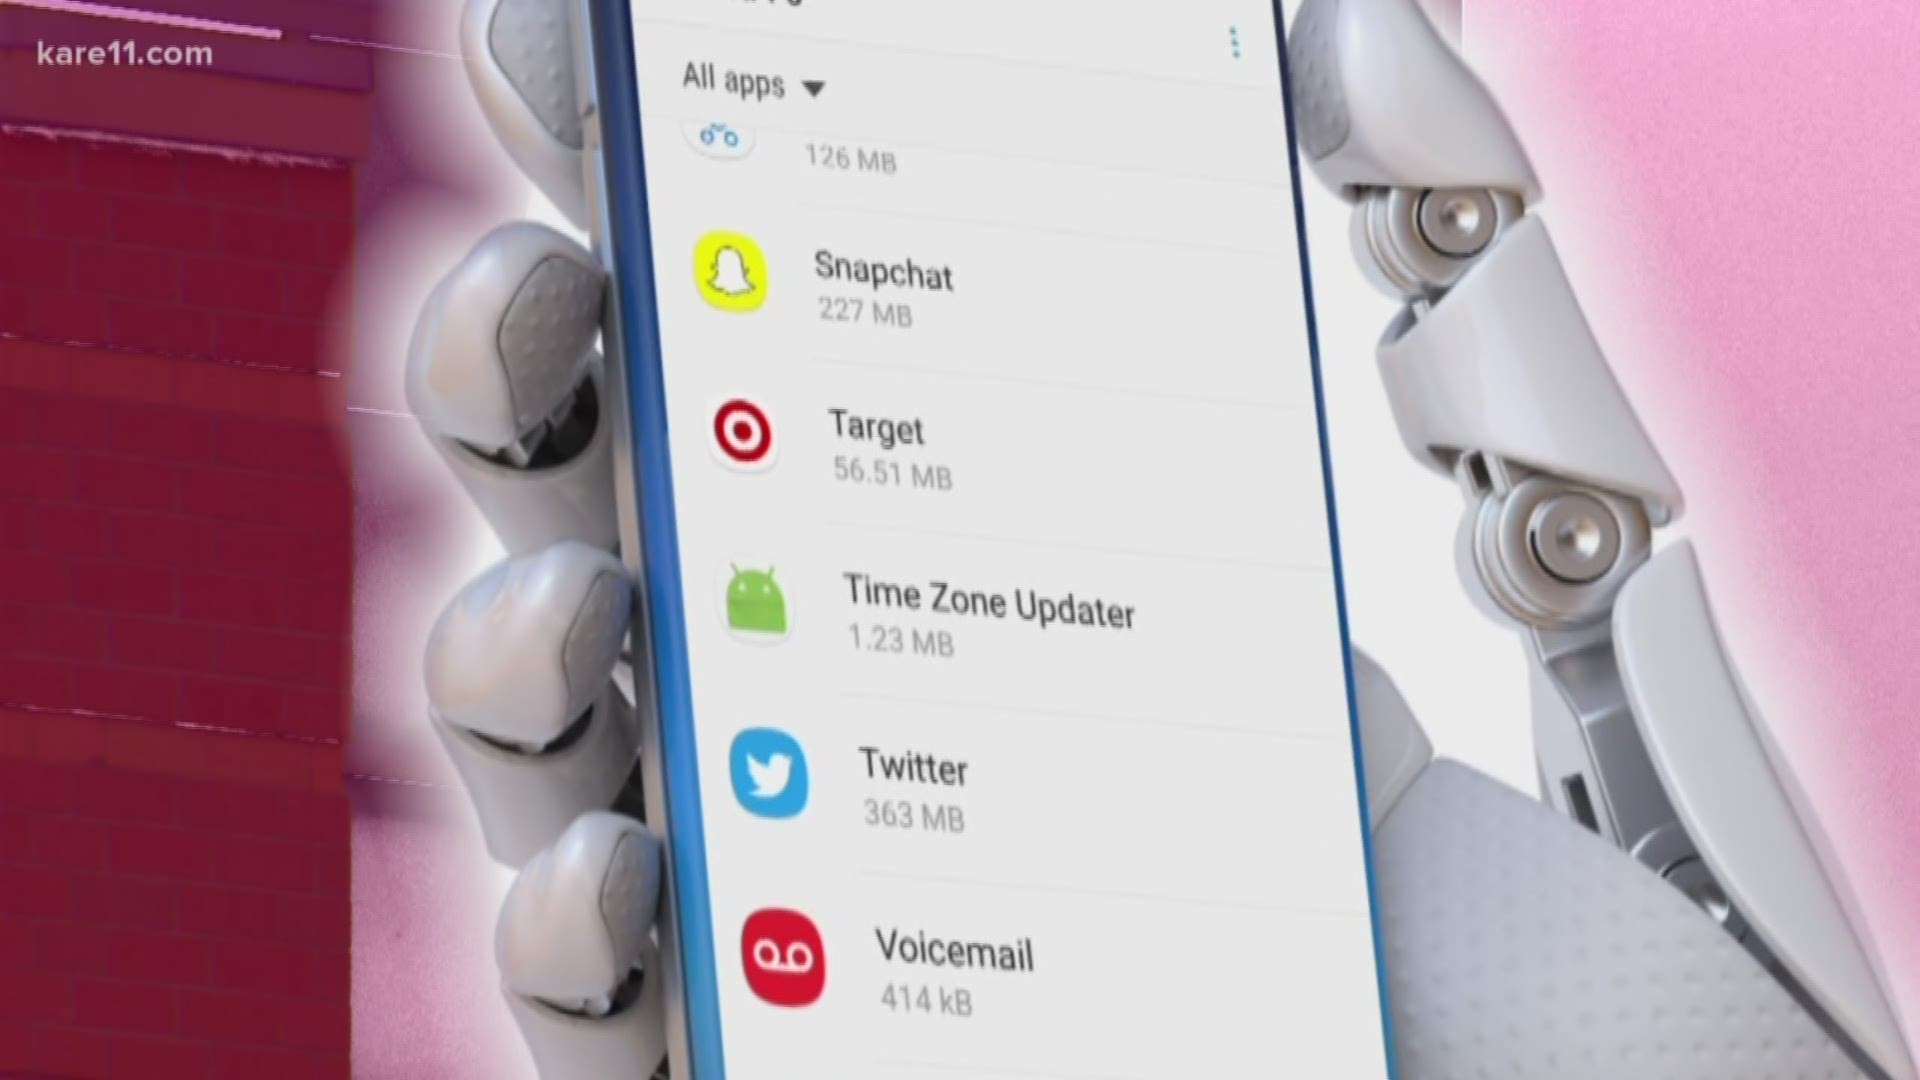 If you allow Target to track your phone location, the app will switch certain prices from online to in-store. It will not clearly say it's doing so.